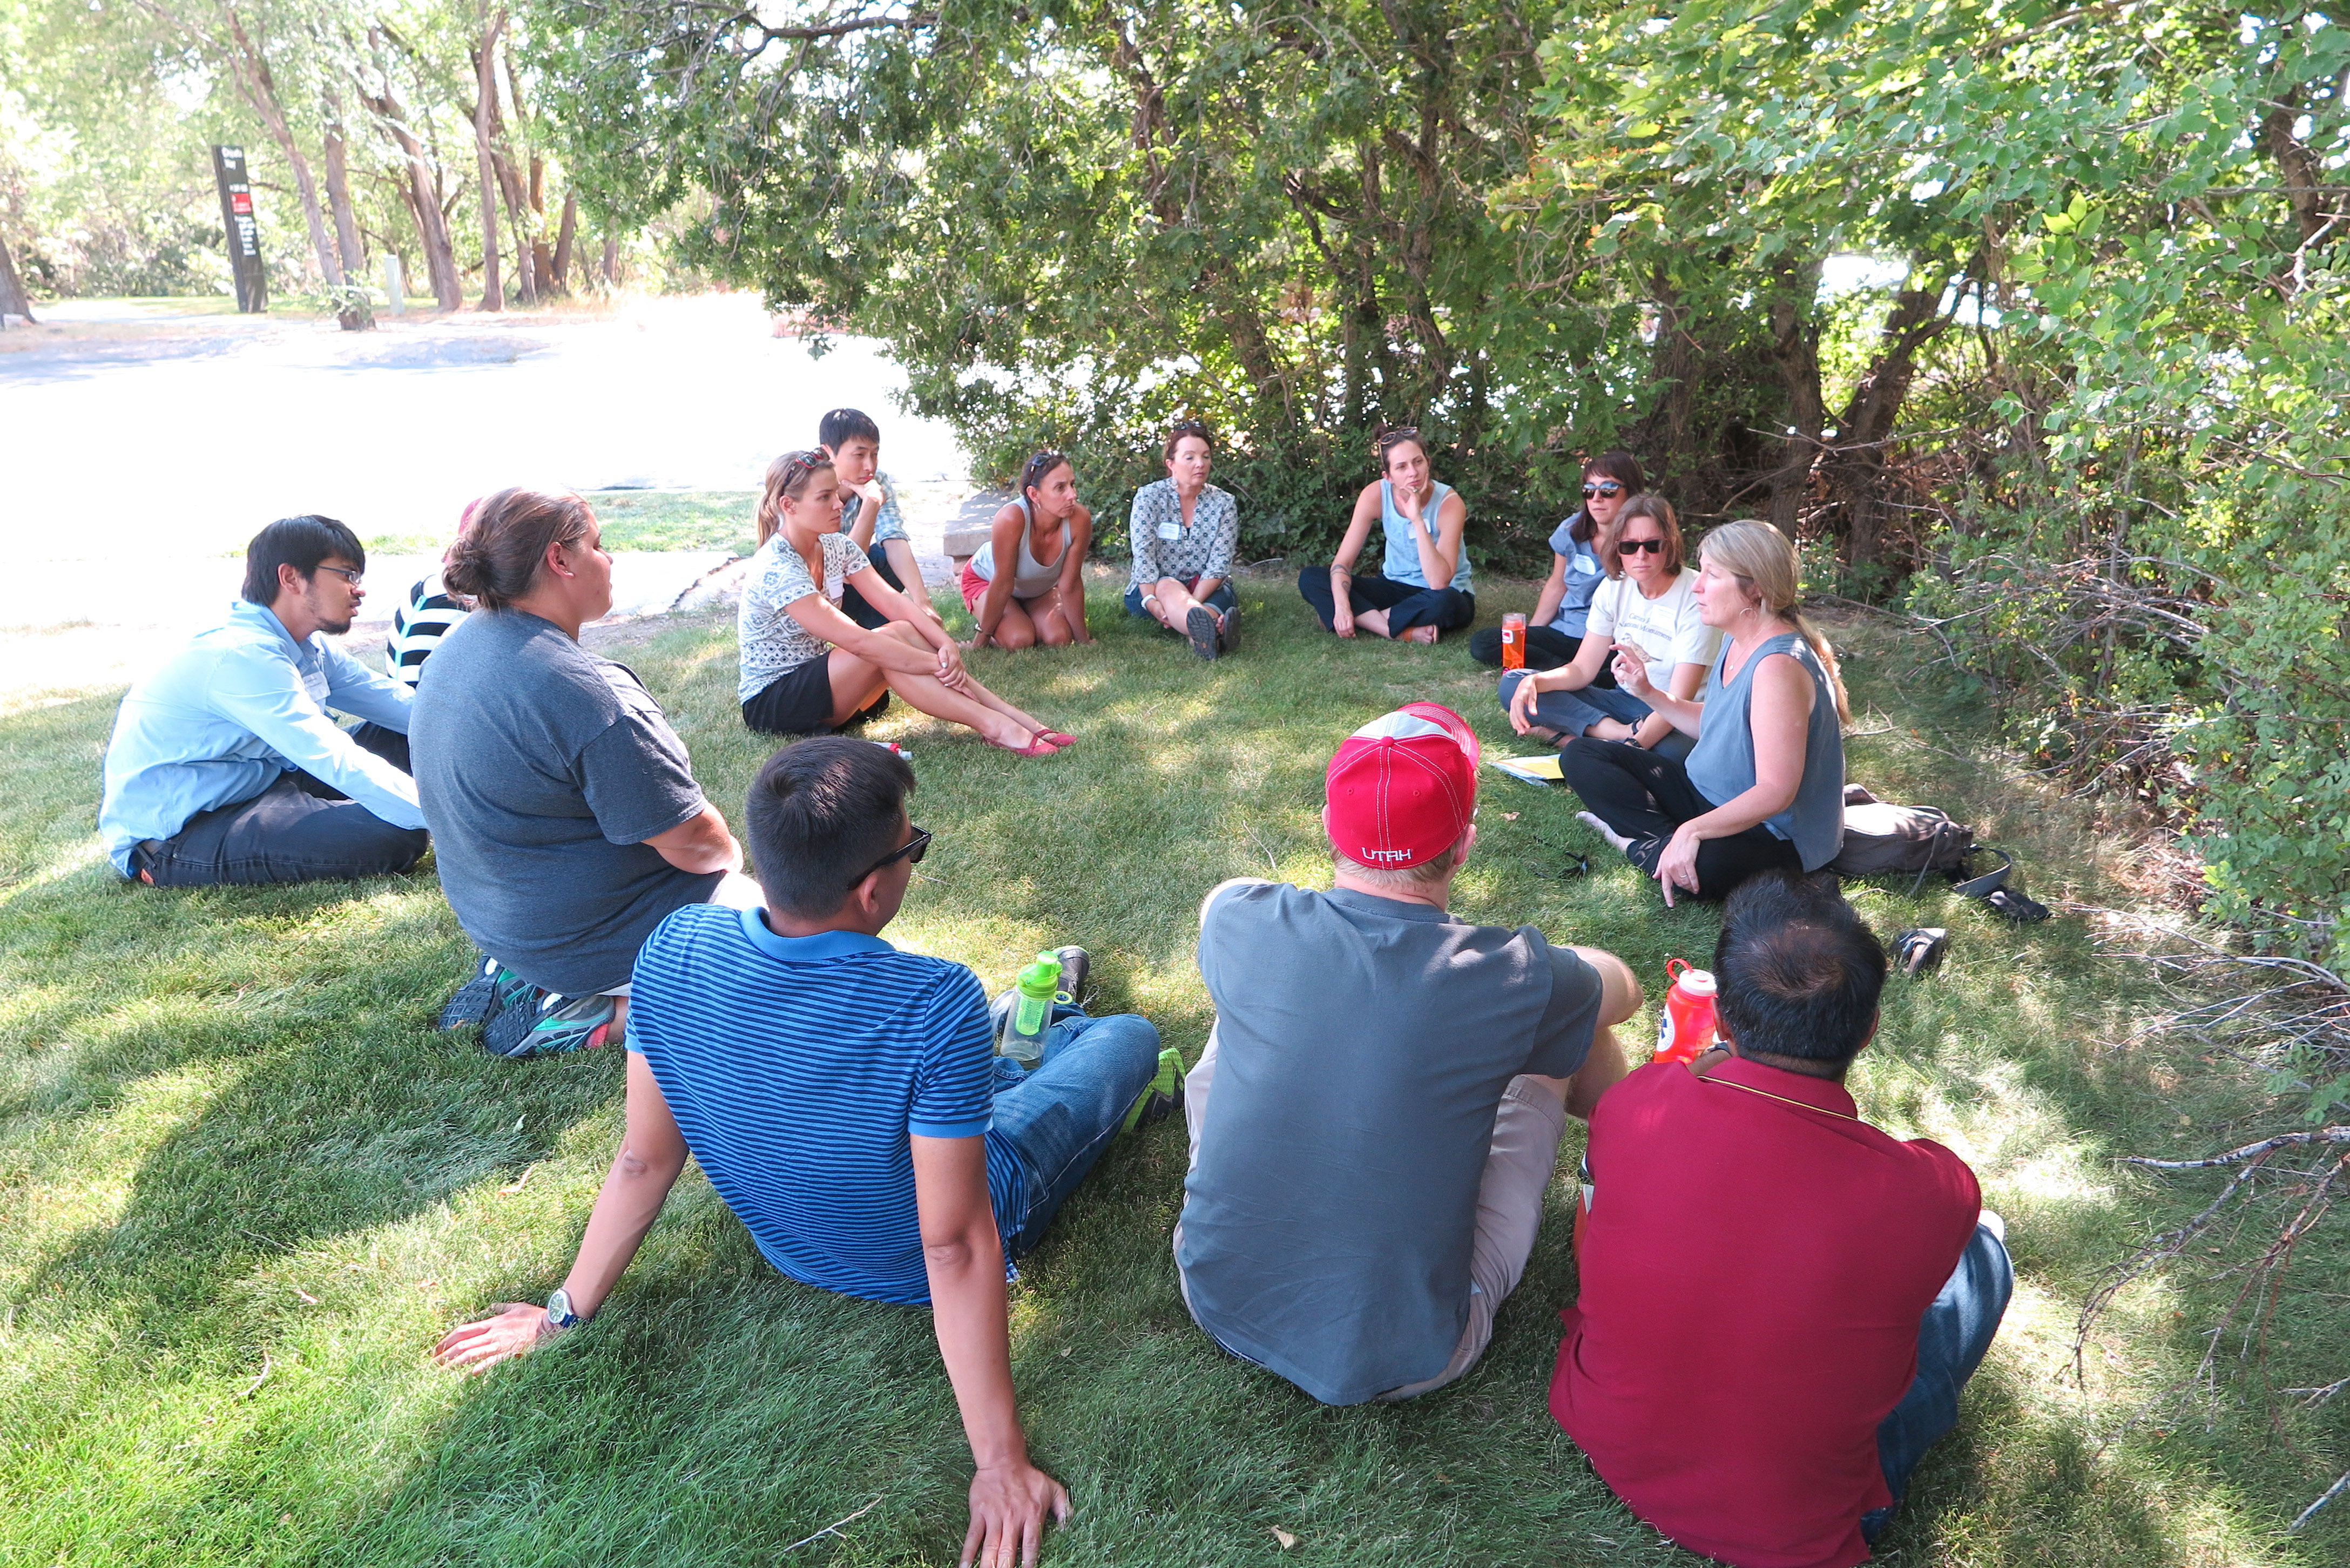 University of Utah Sustainability Schoalrs sitting in a circle and discussing sustainability.